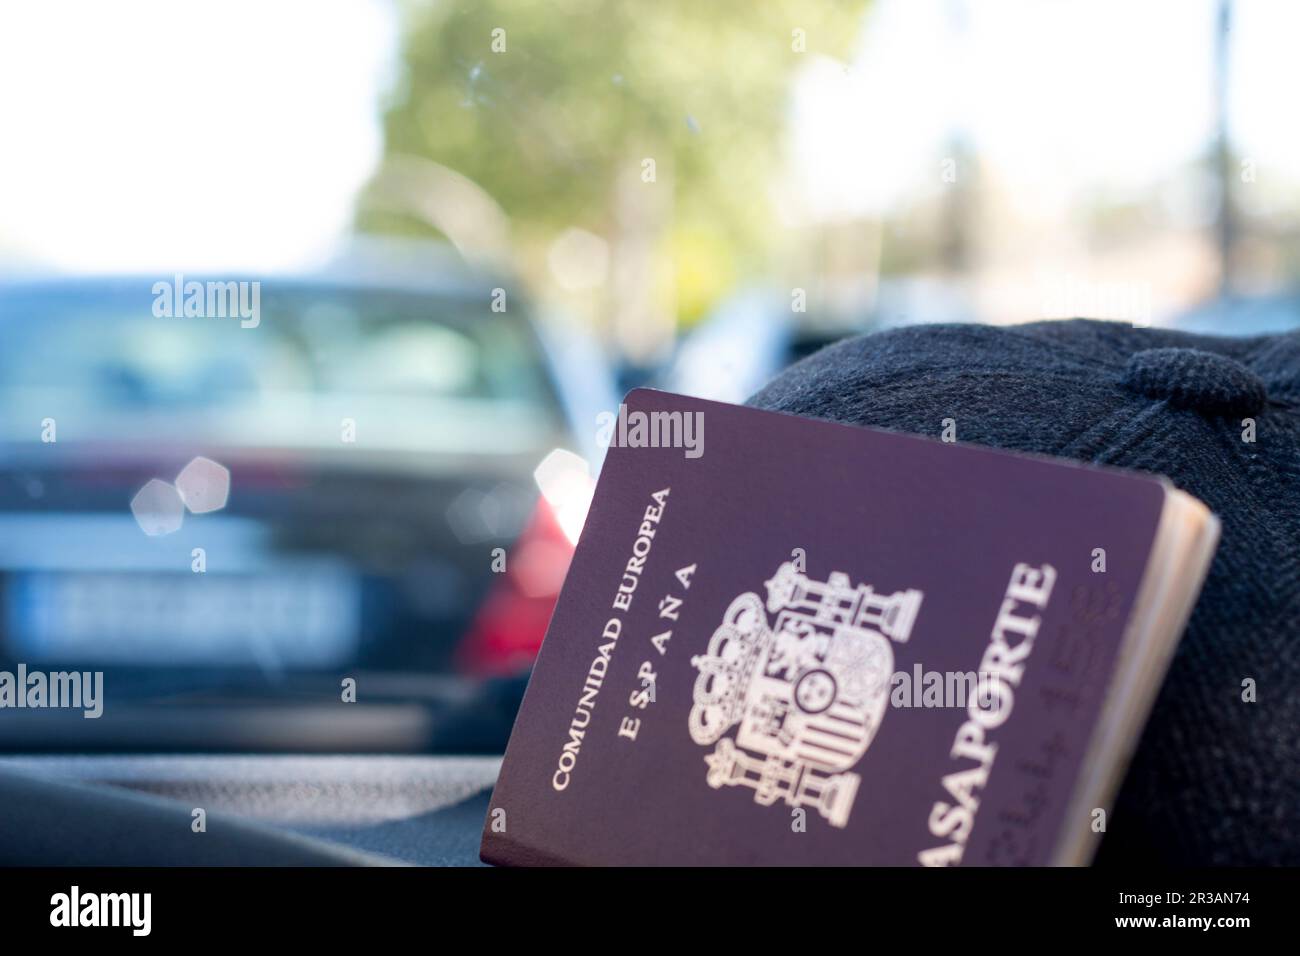 Passport of the European community, of Spain. With a background of a map, pride flag, inside a car or with sunglasses, or a hat Stock Photo